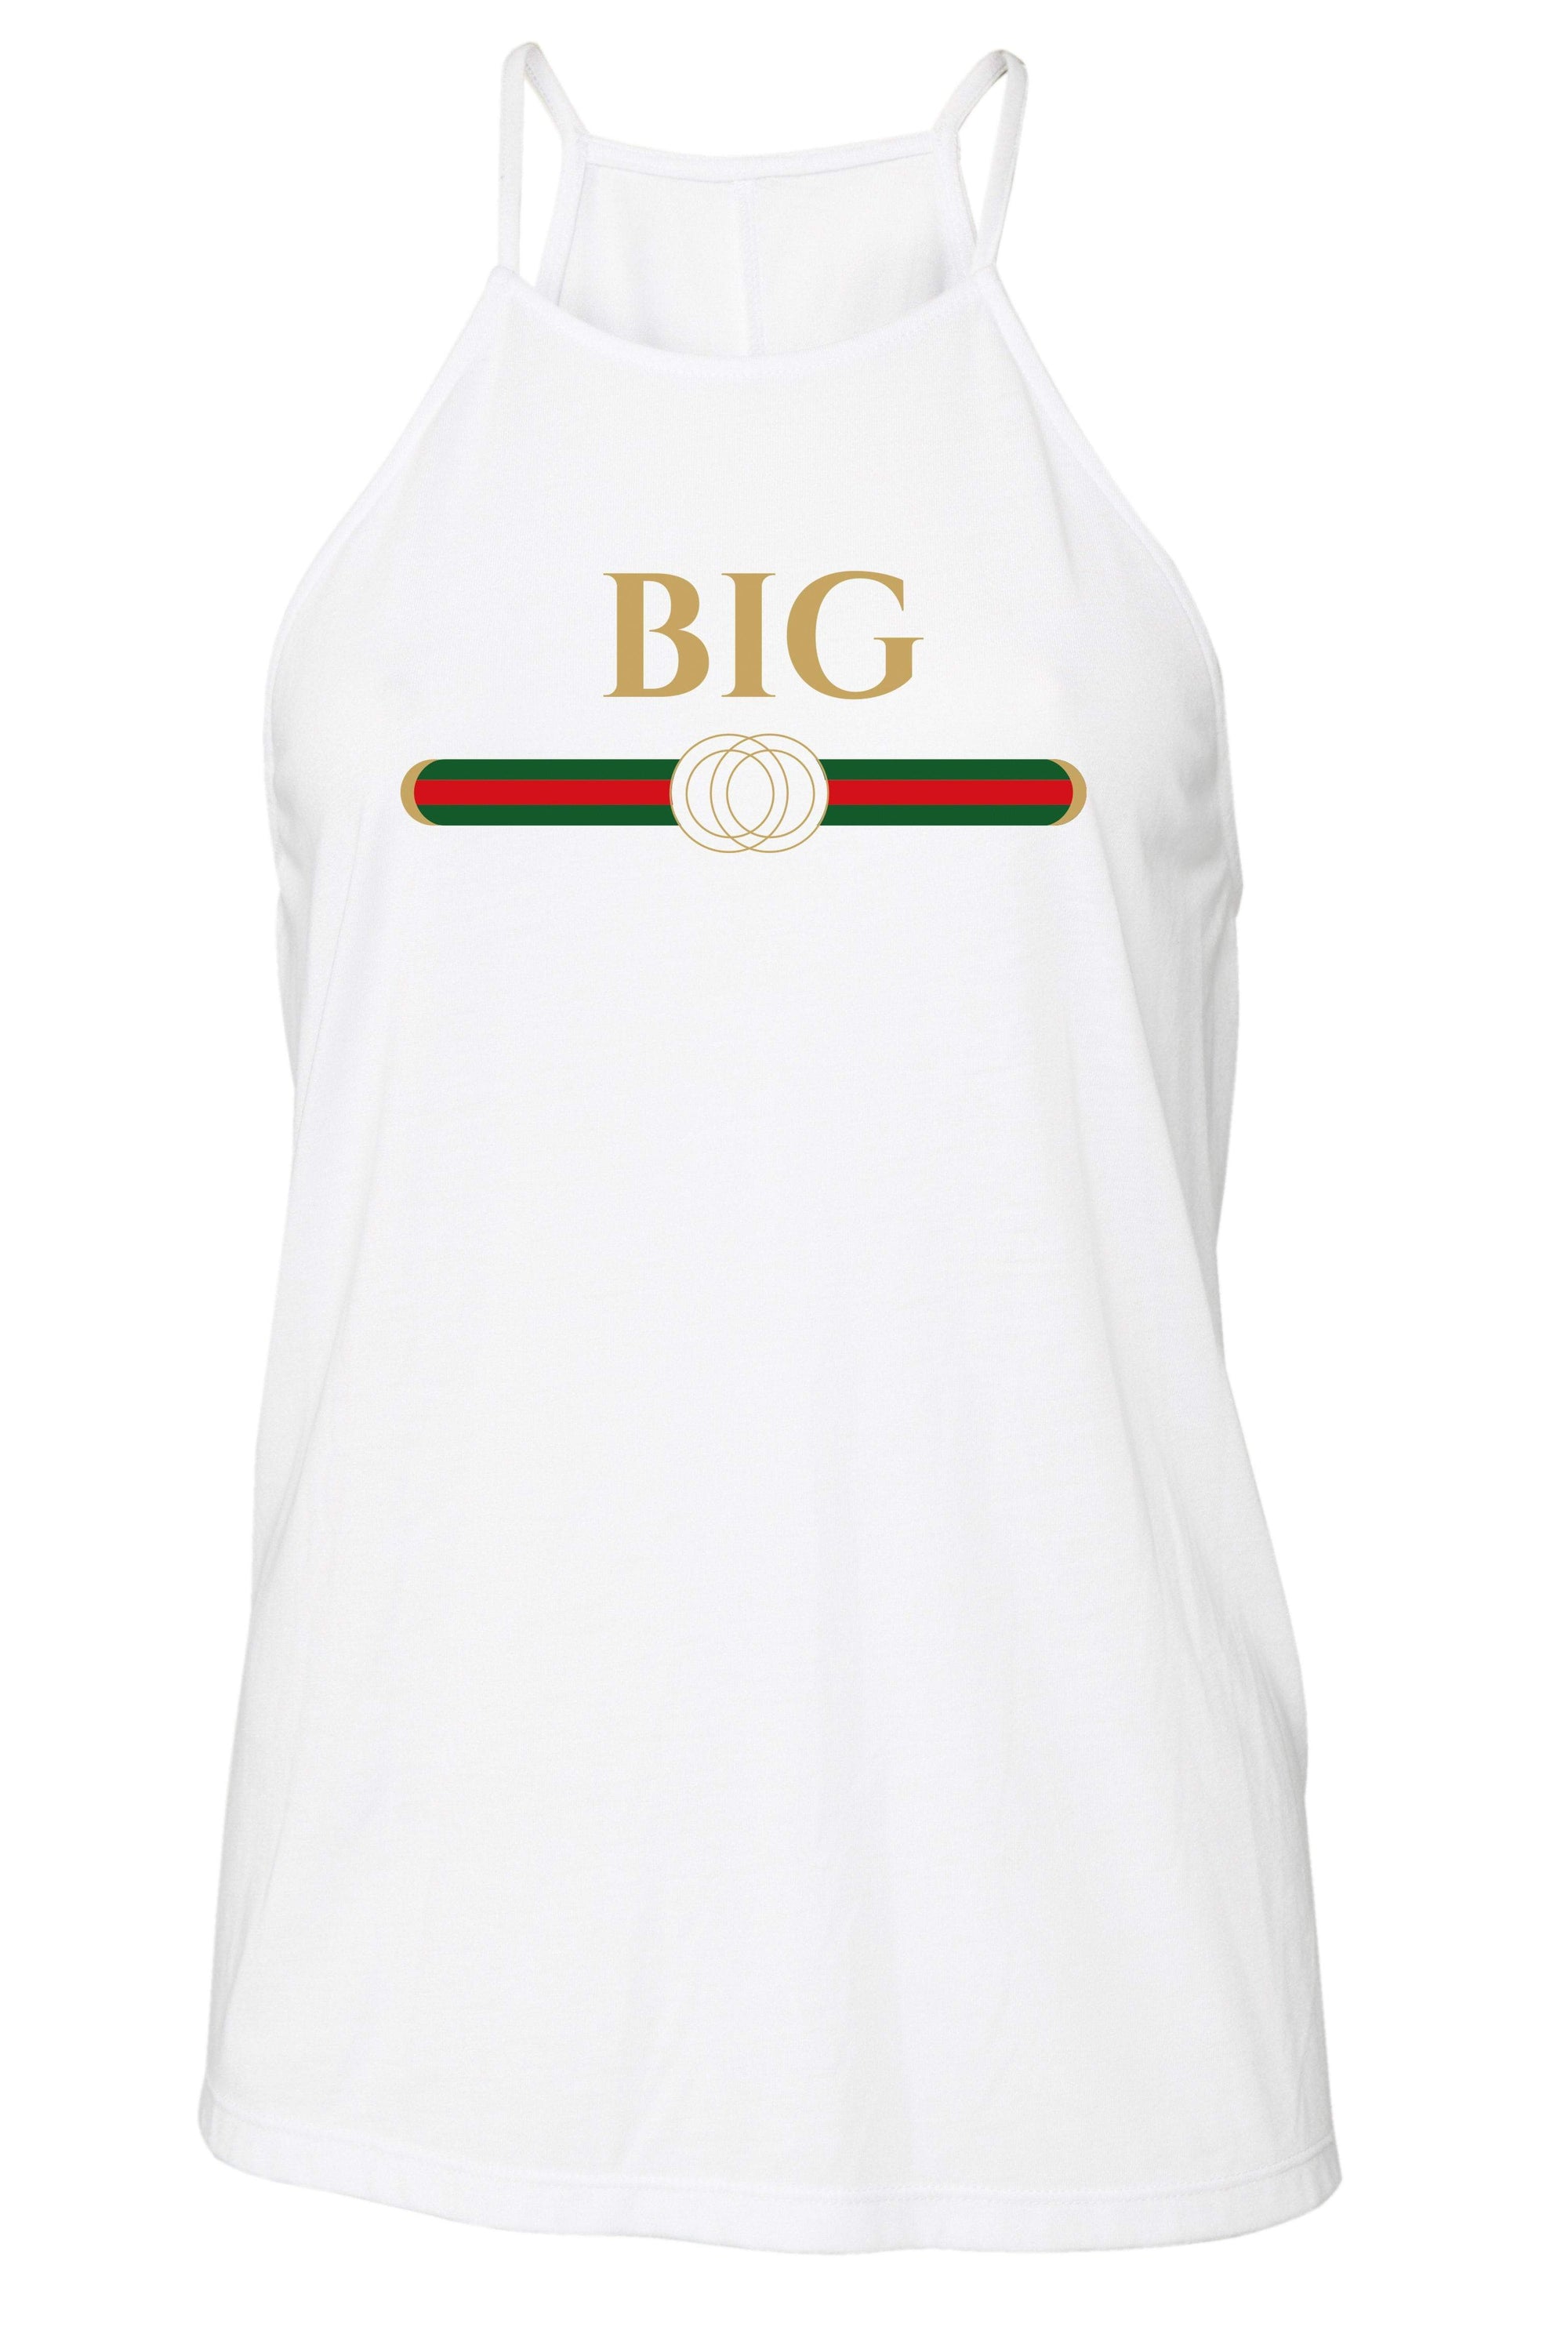 Big Little Designer Tank - Bella Flowy High Neck, Ladies, Sunny and Southern, - Sunny and Southern,